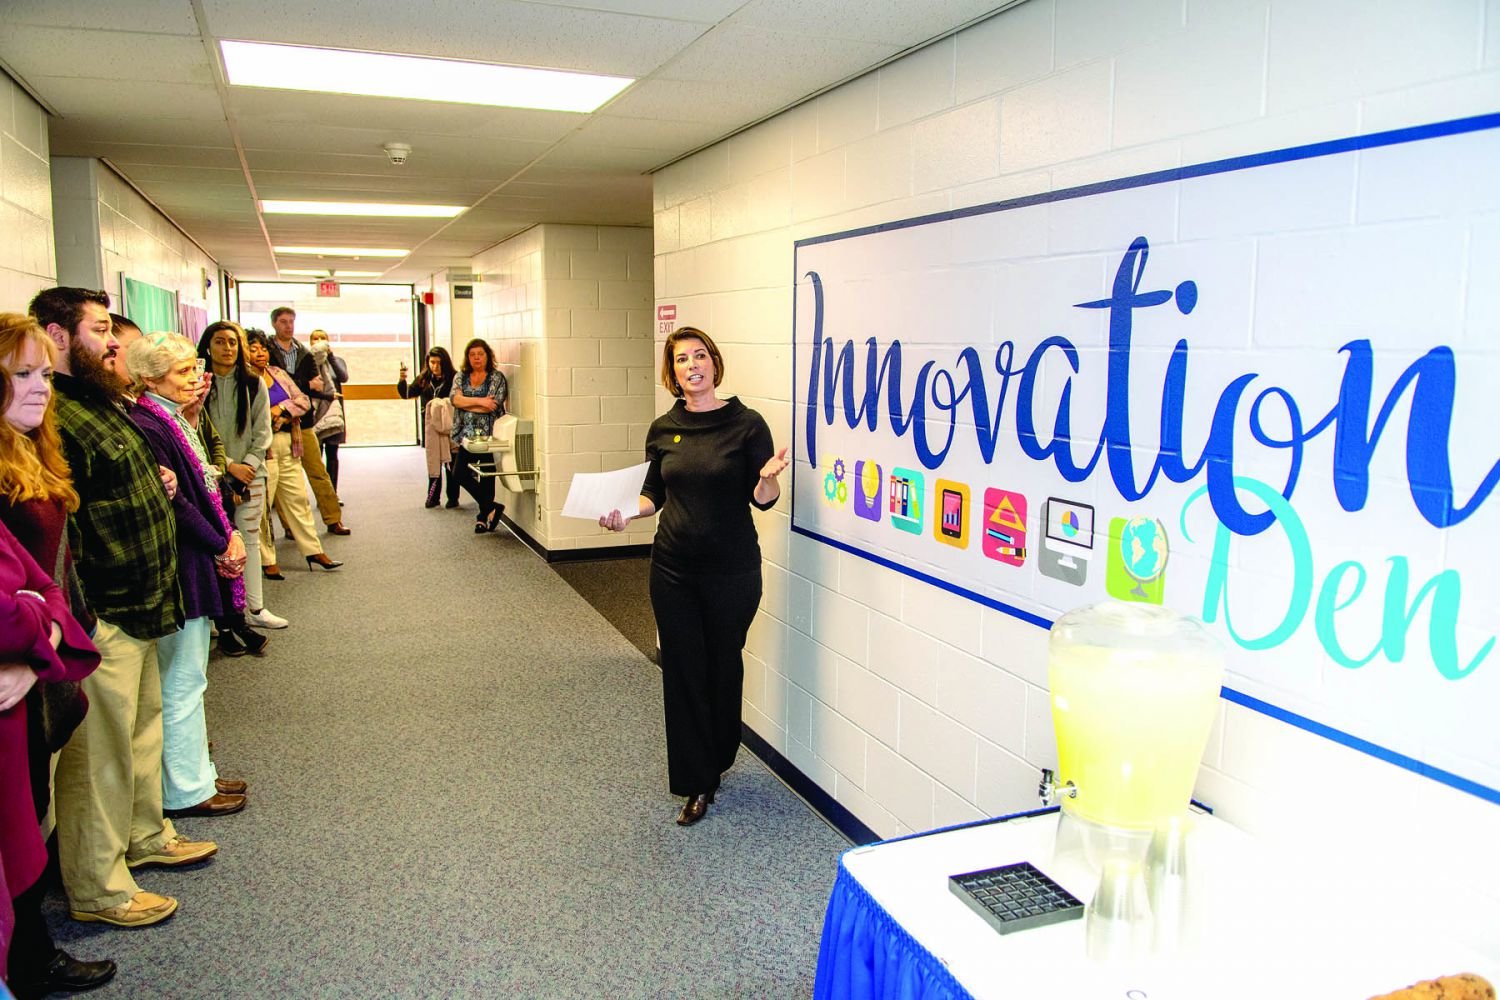 Tracy Timby, dean of the newly renamed Business + Innovation Department at Bucks County Community College, shows off the entrance to the new Innovation Den in Grupp Hall on the Newtown Campus.